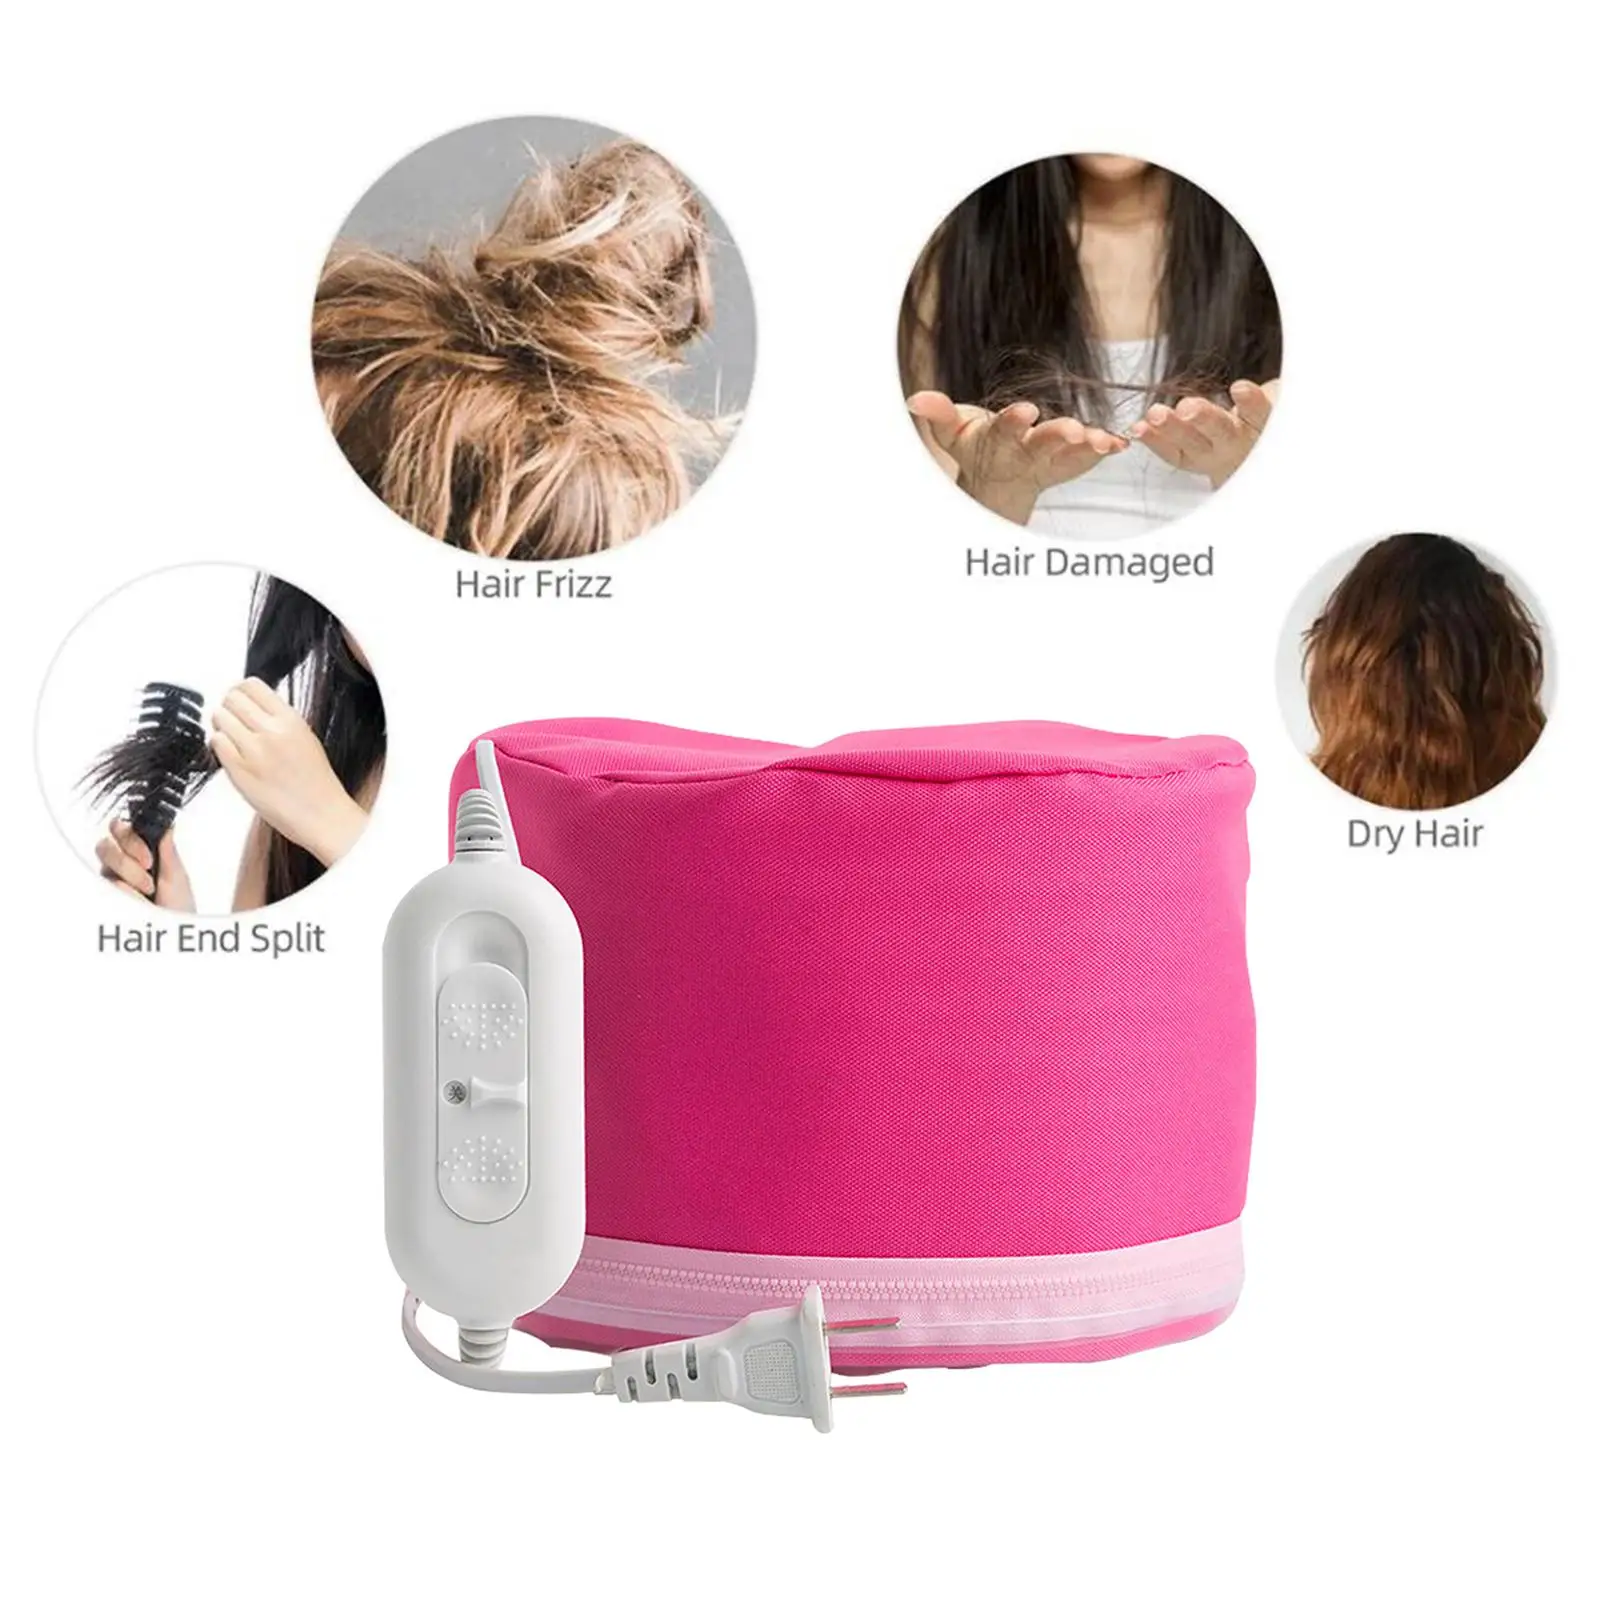 Hair Heating Caps Steamer 3 Adjustable Size, ,Thermal Heat Caps for Deep Conditioning Curling ,Travel ,Nourishing